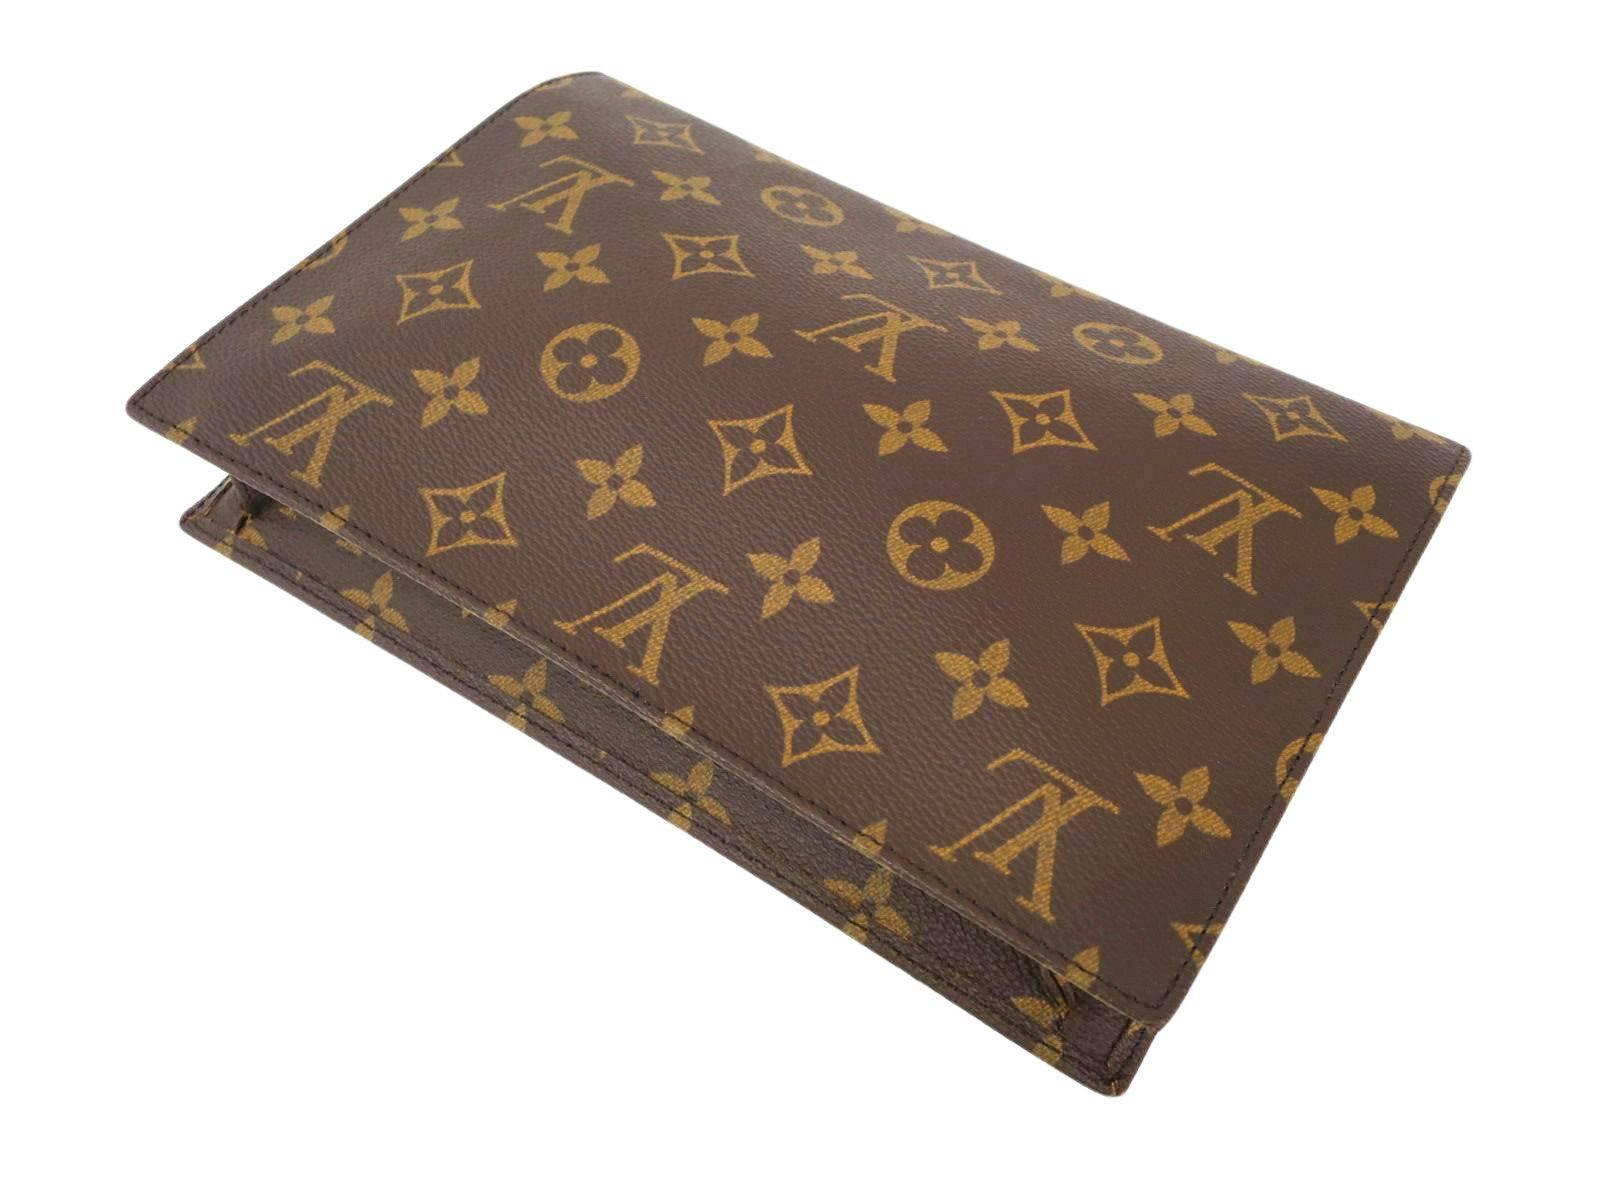 CURATOR'S NOTES

Monogram canvas
Snap closure
Made in France
Date code 
Measures 9" W x 6.5" H x 1" D